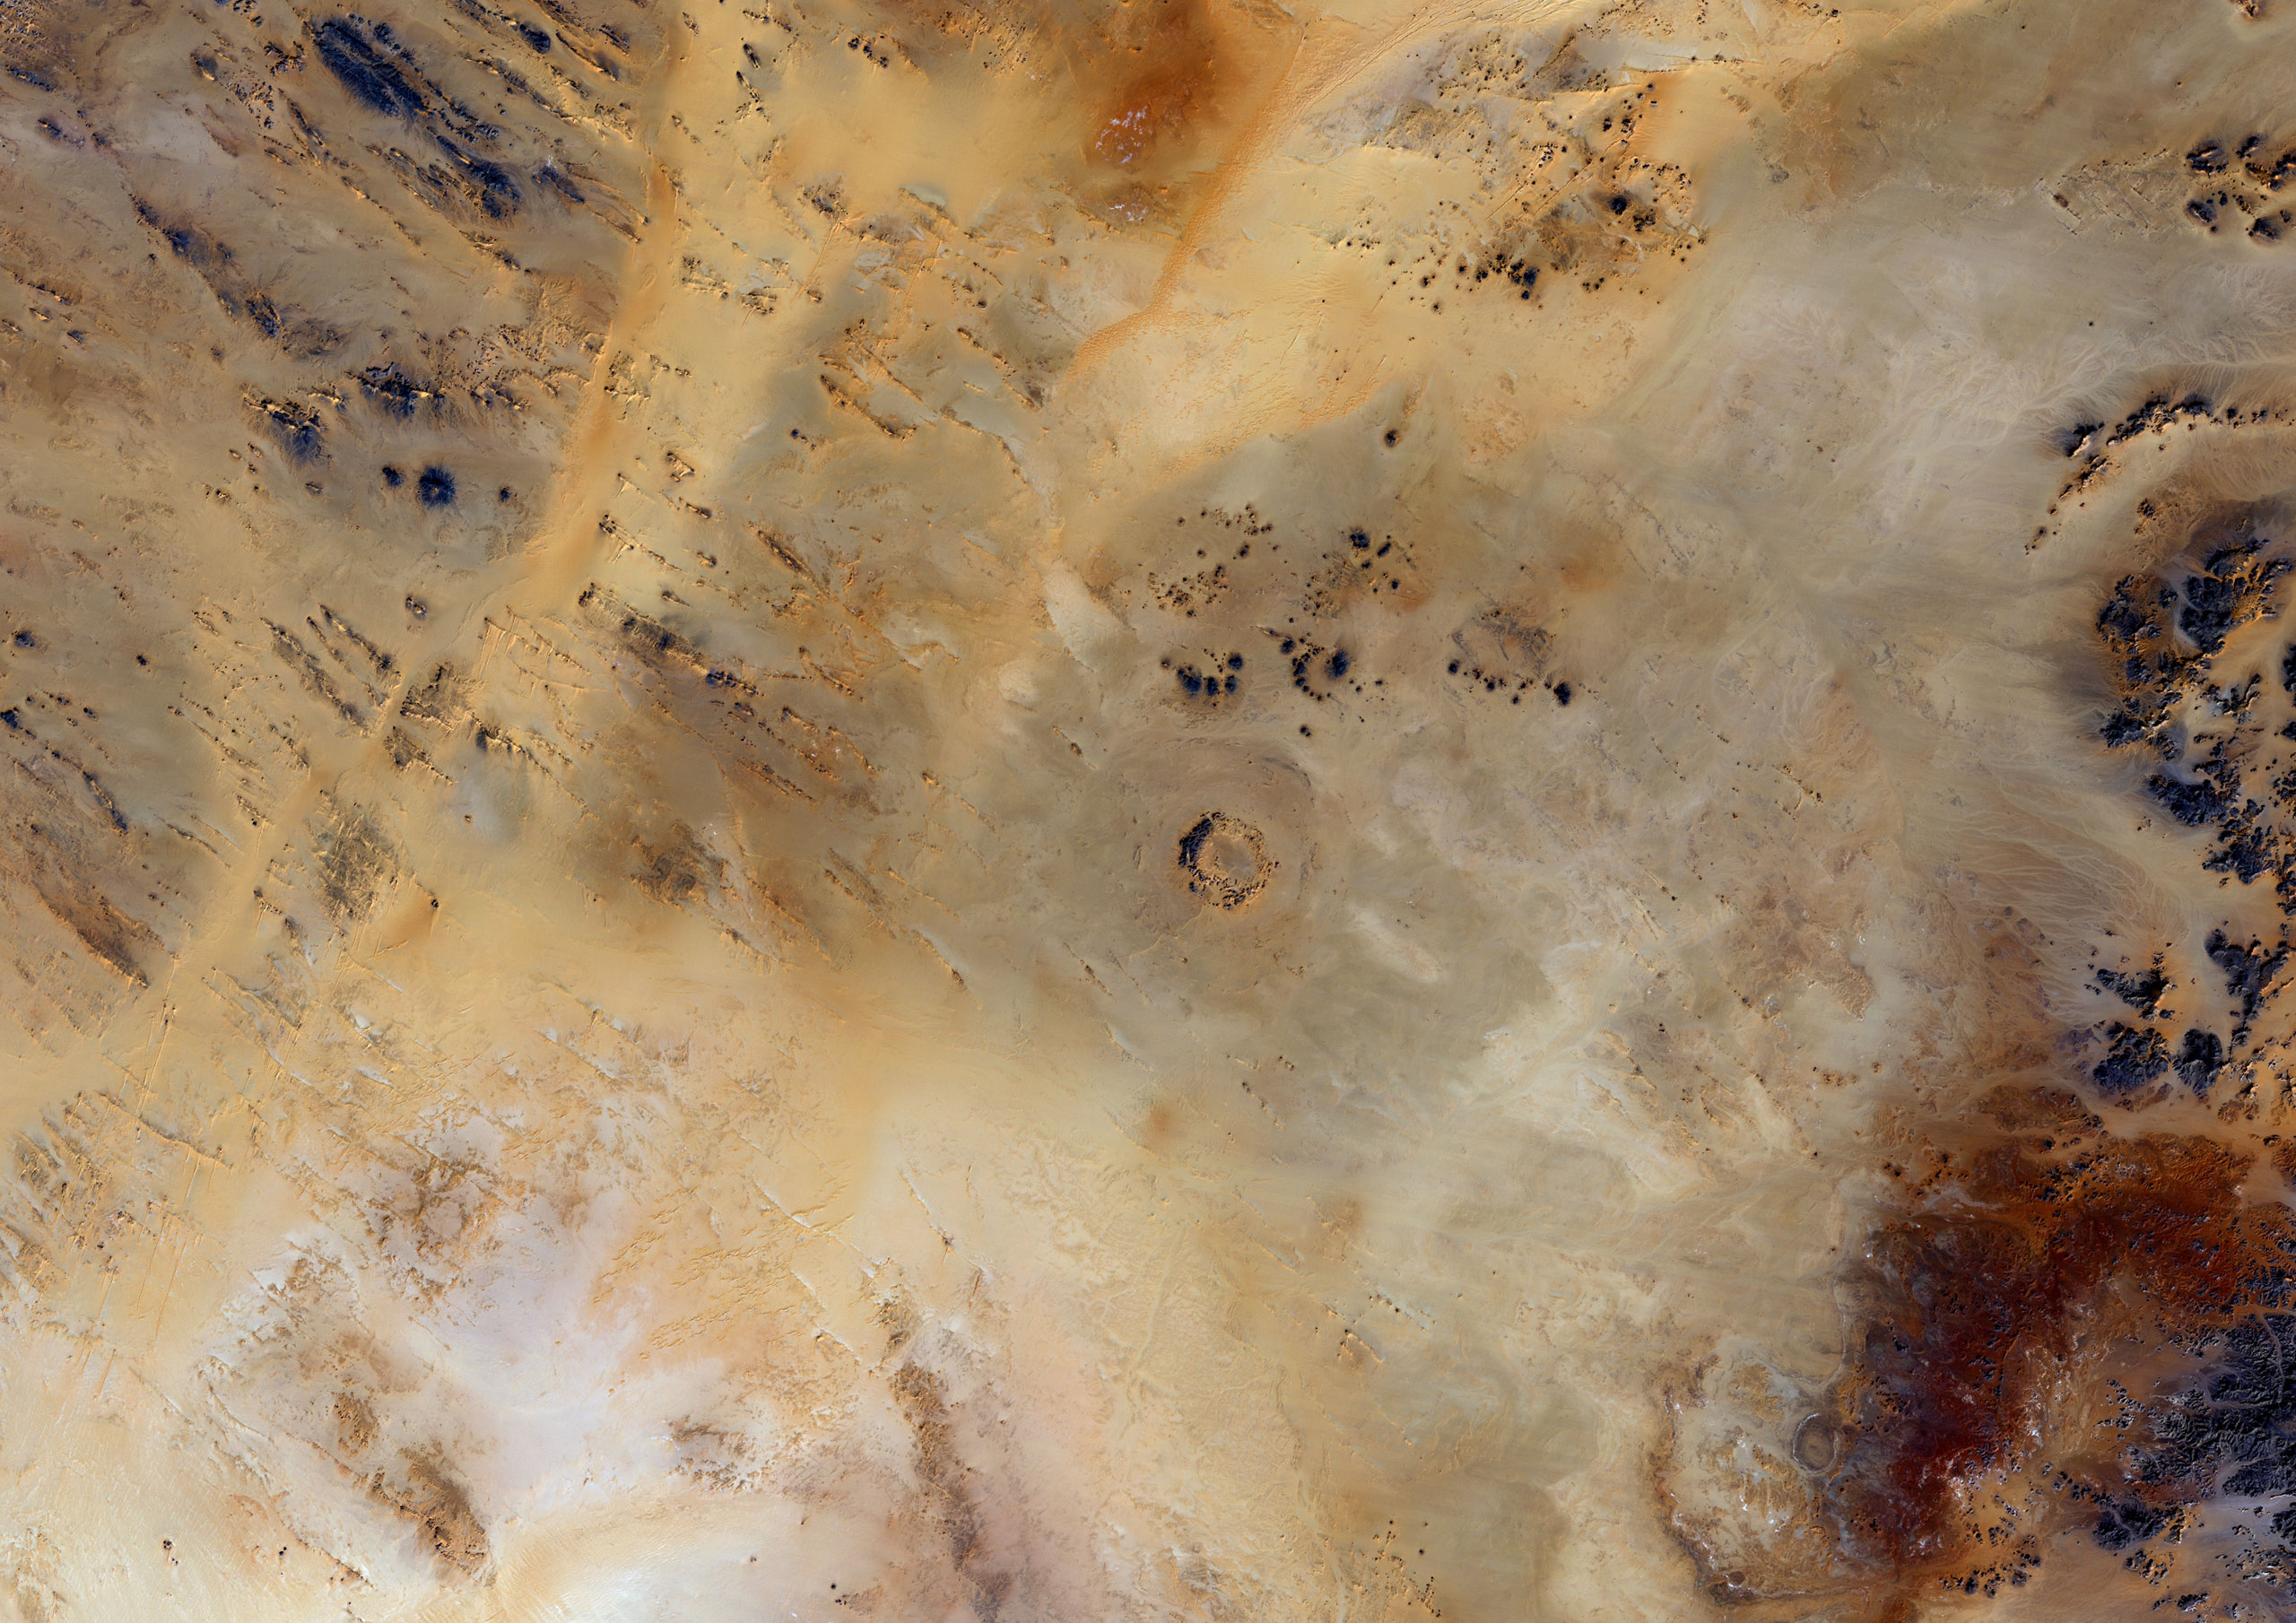 The Oasis crater North of Koufra Oasis in Libya. It is less than 120 million years old and was thought to have a diameter of roughly 18 km post-impact.